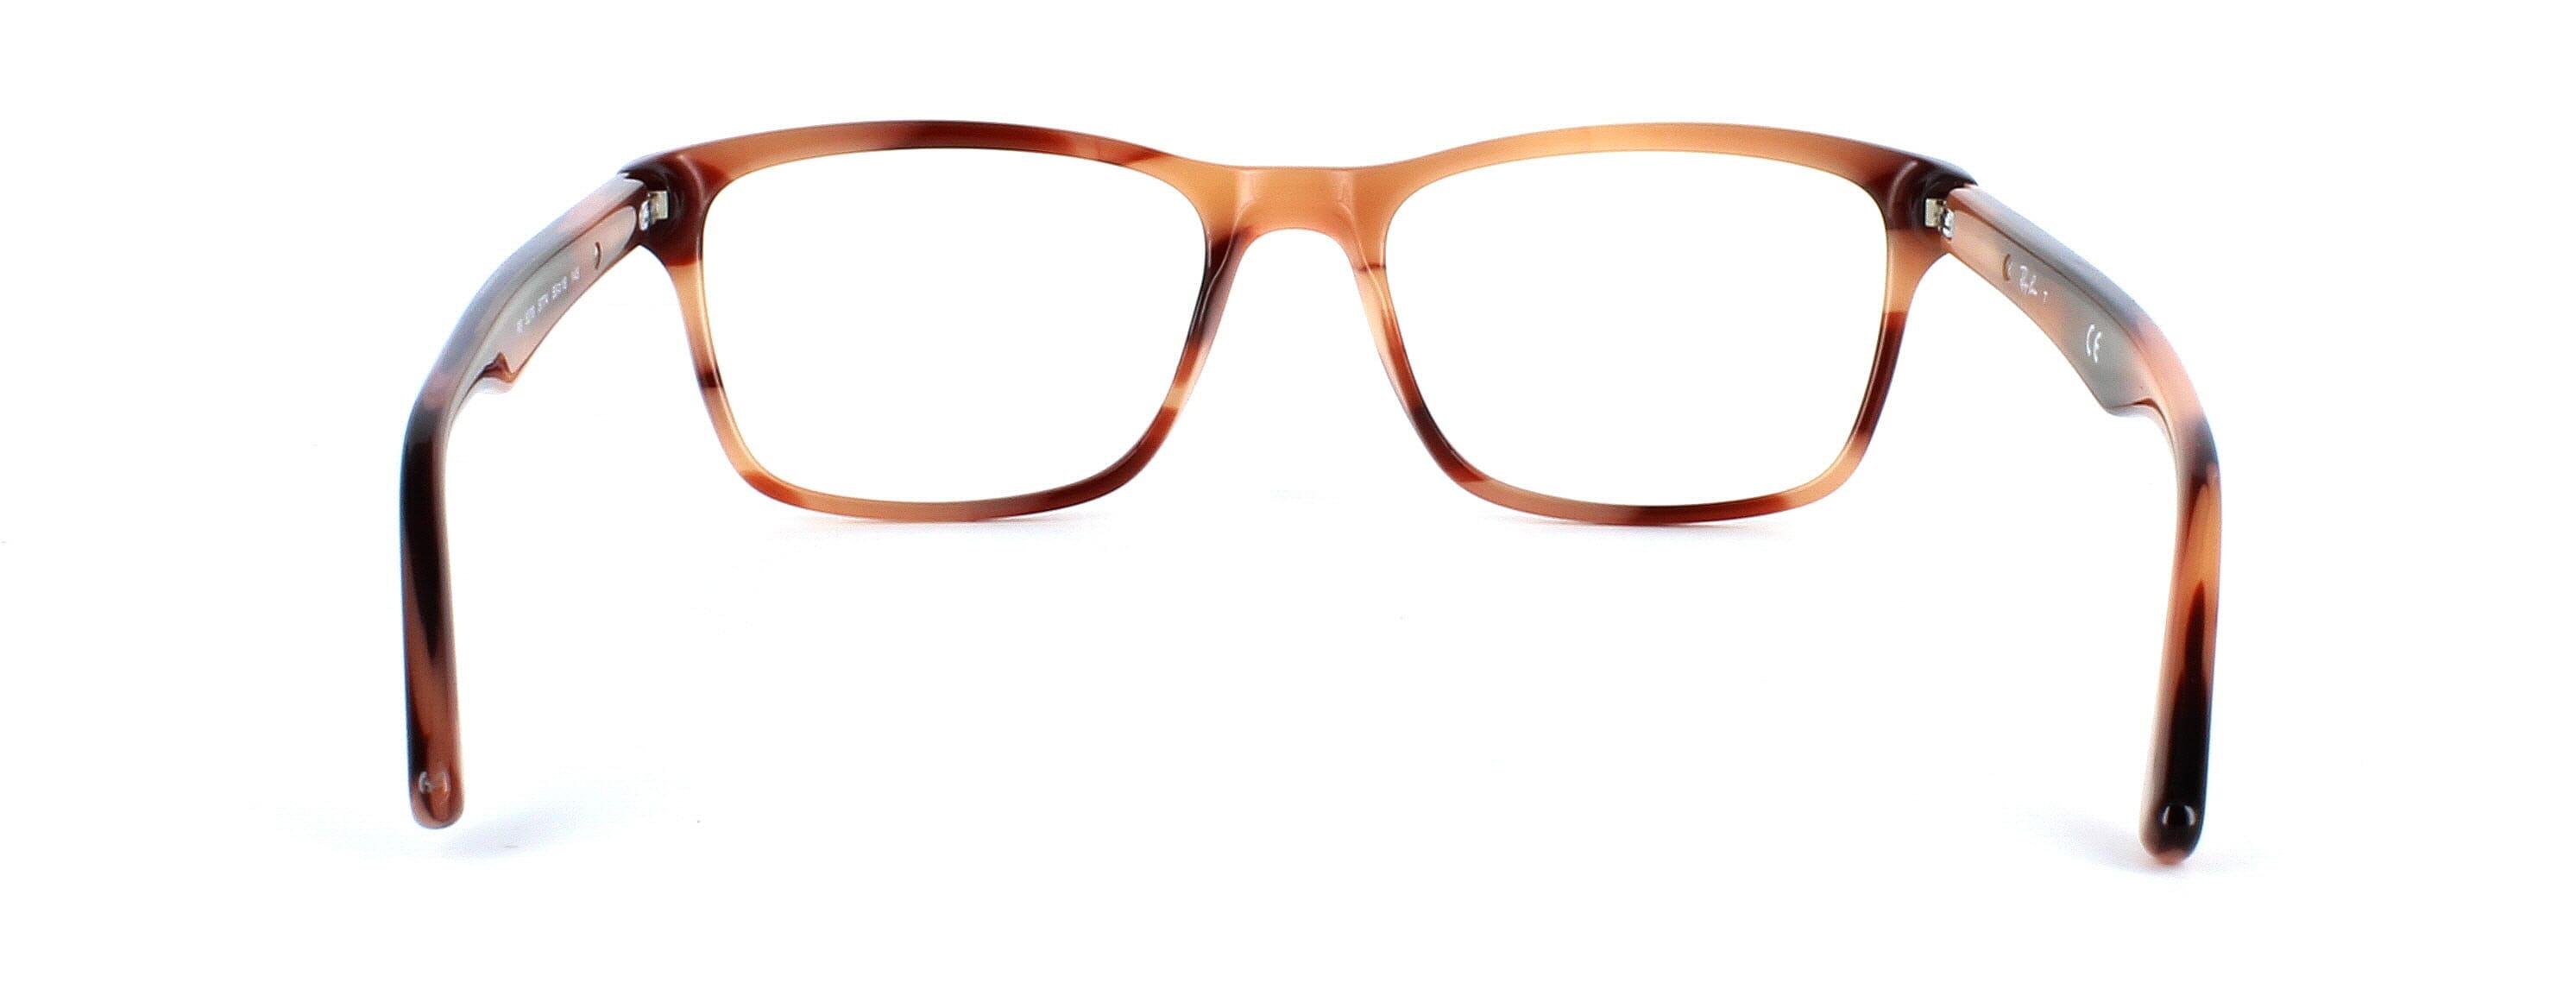 Unisex acetate glasses by Ray Ban. Model 5279 5774 - mottled brown - image view 4